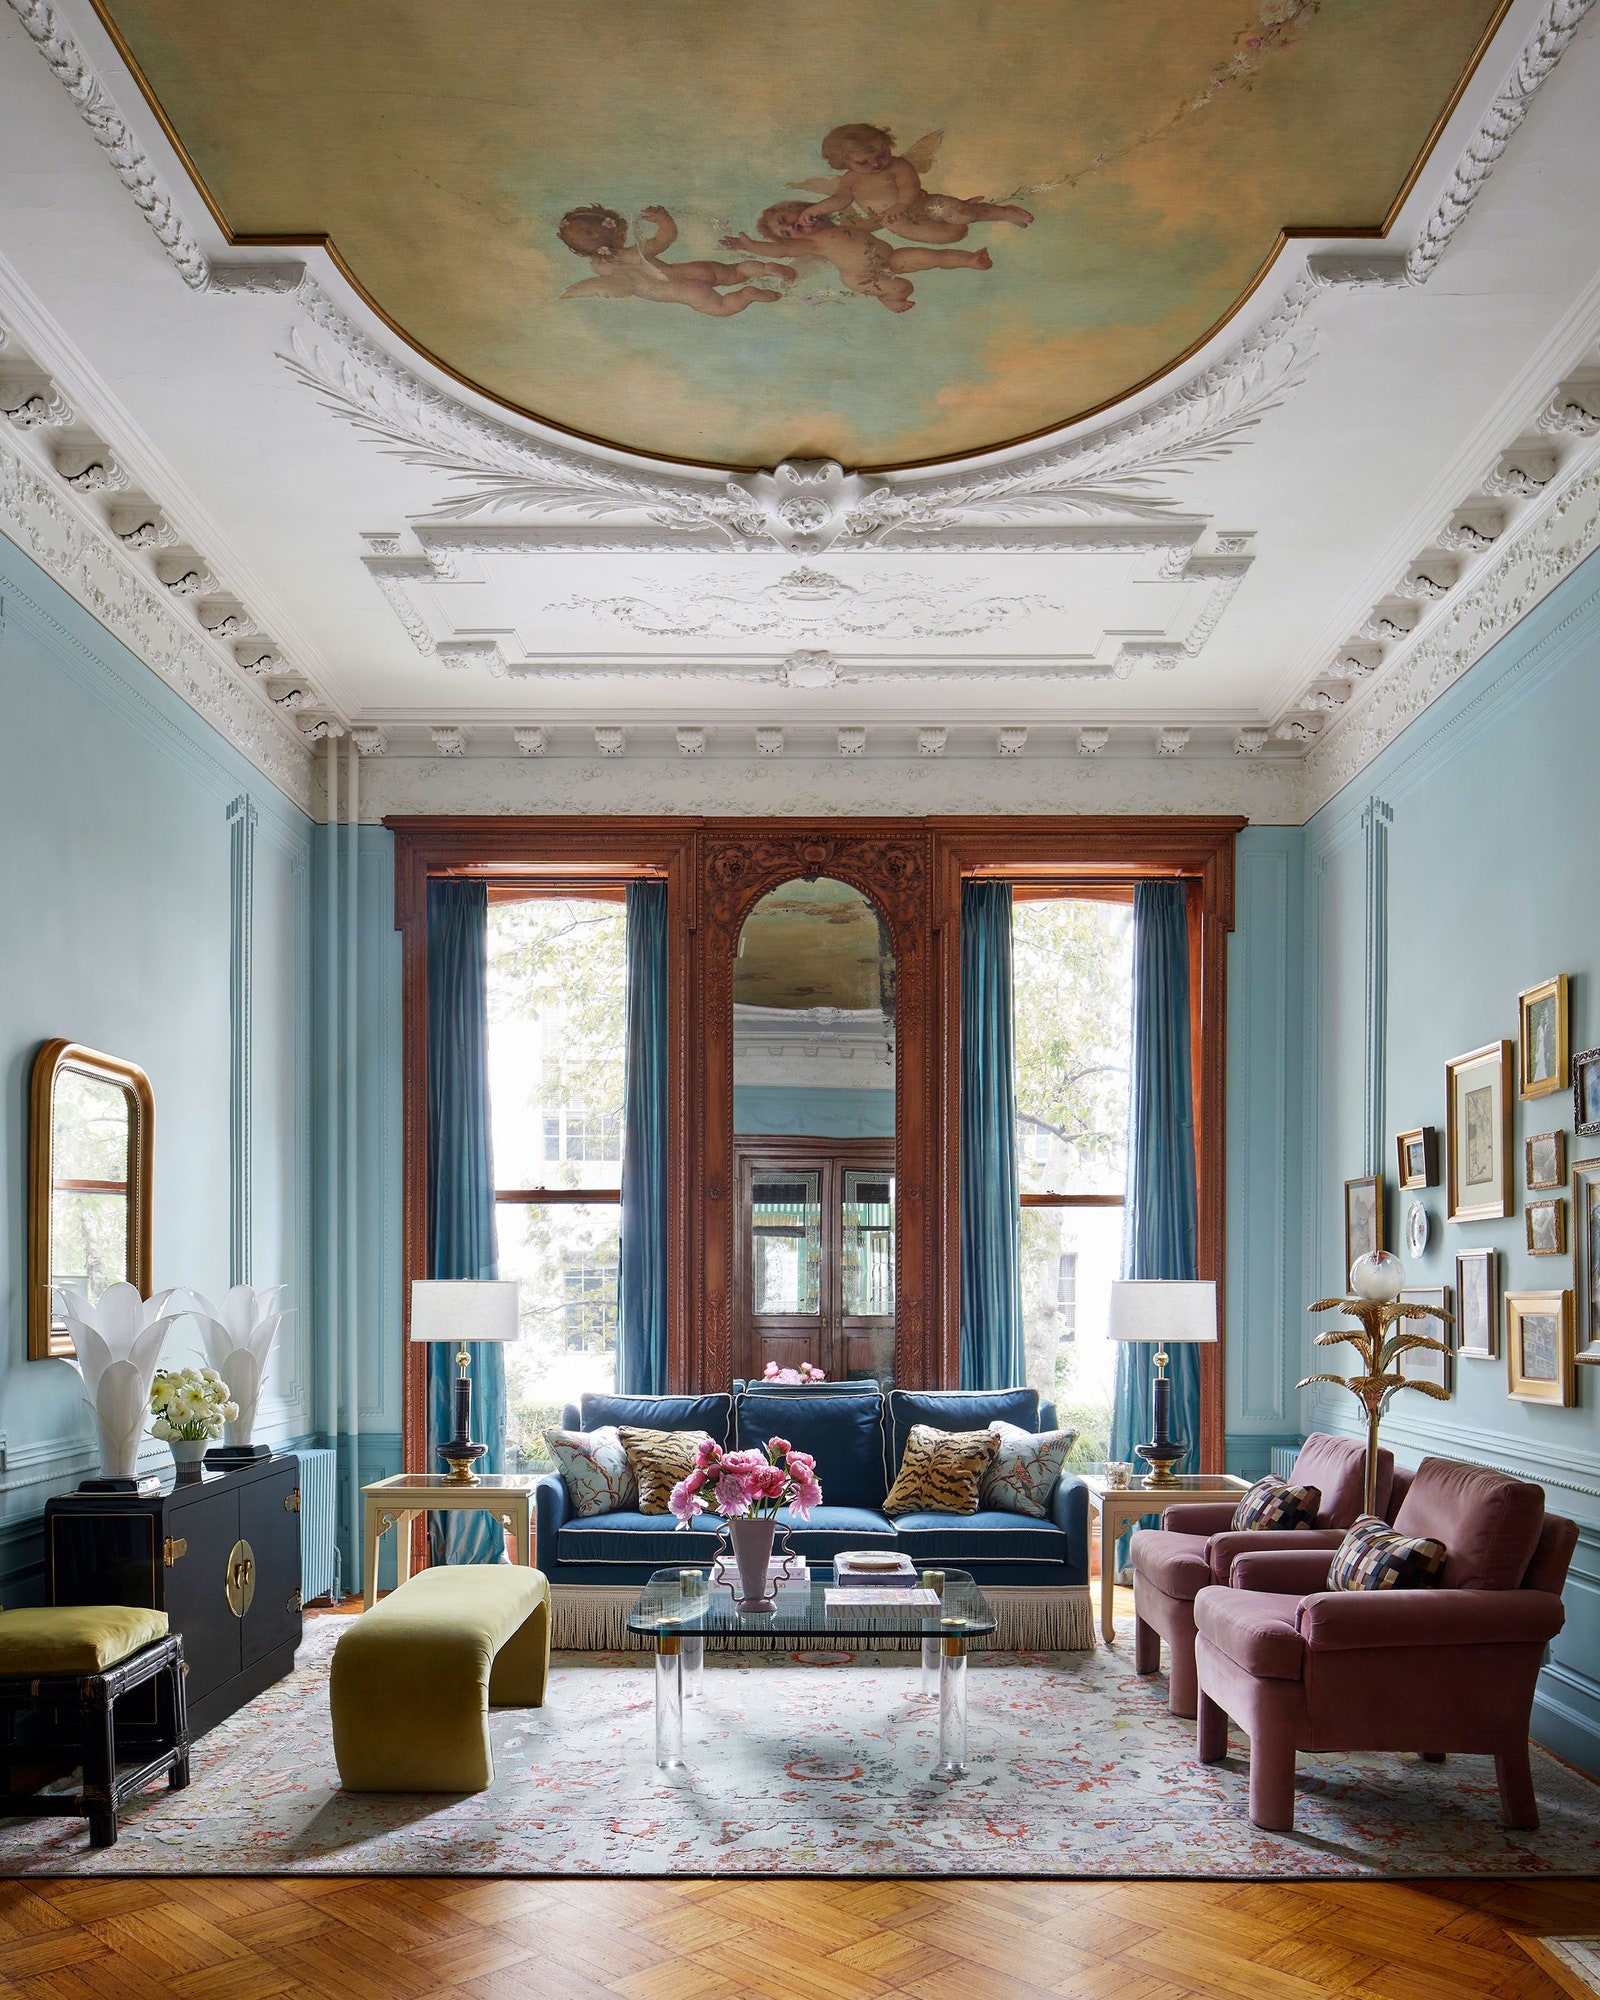 Brownstone parlor with intricate ceiling molding and antique frescoe